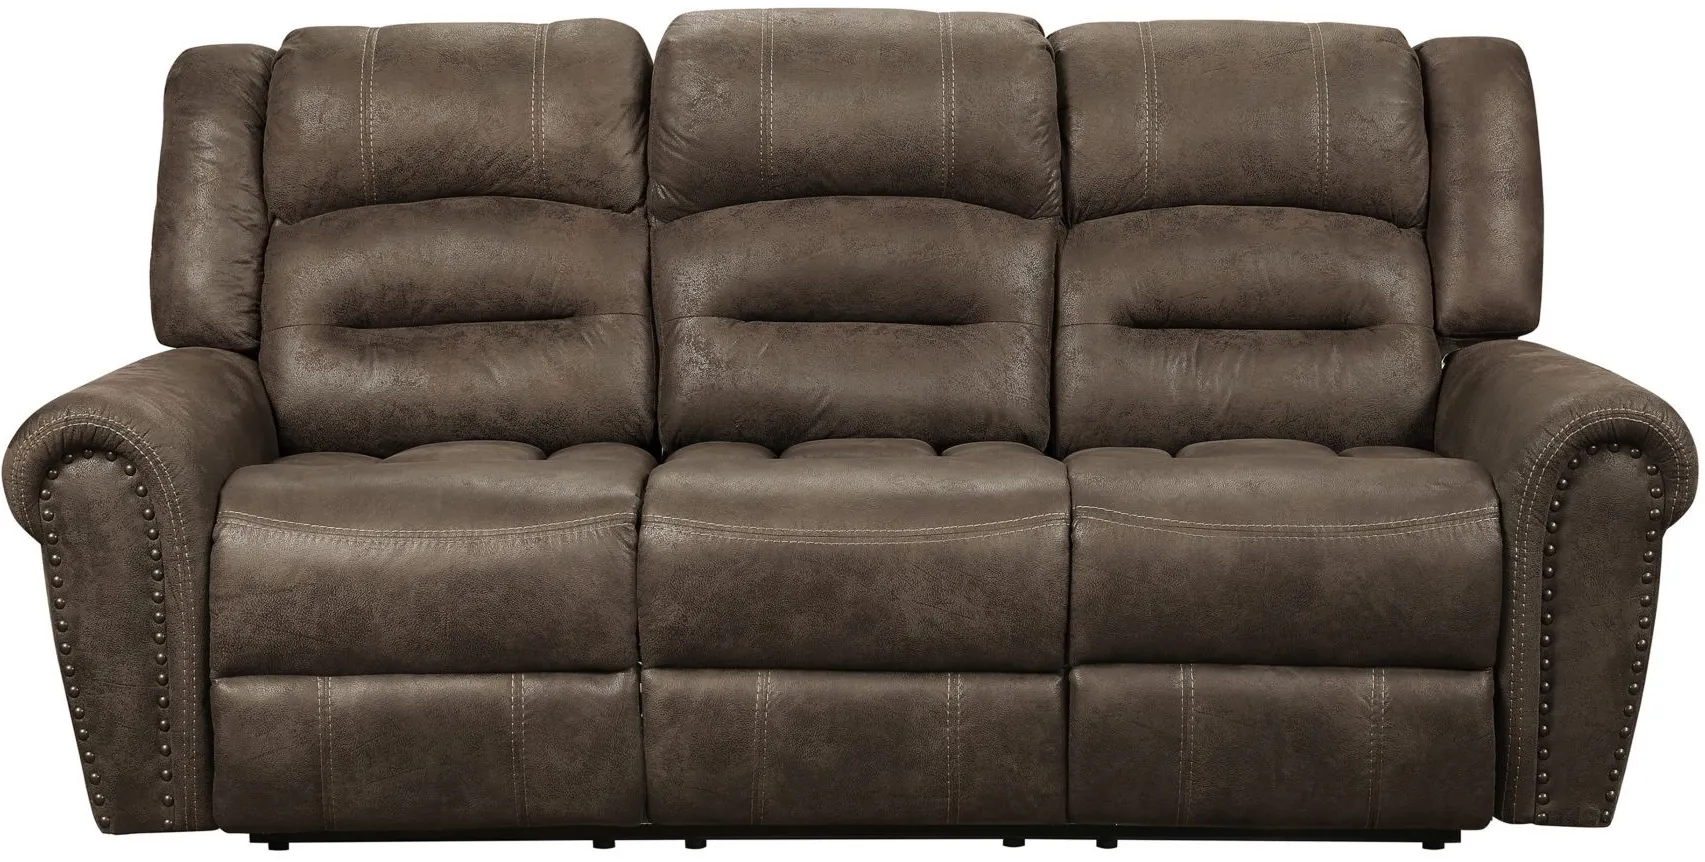 Turkish Double Reclining Sofa in Brown by Homelegance